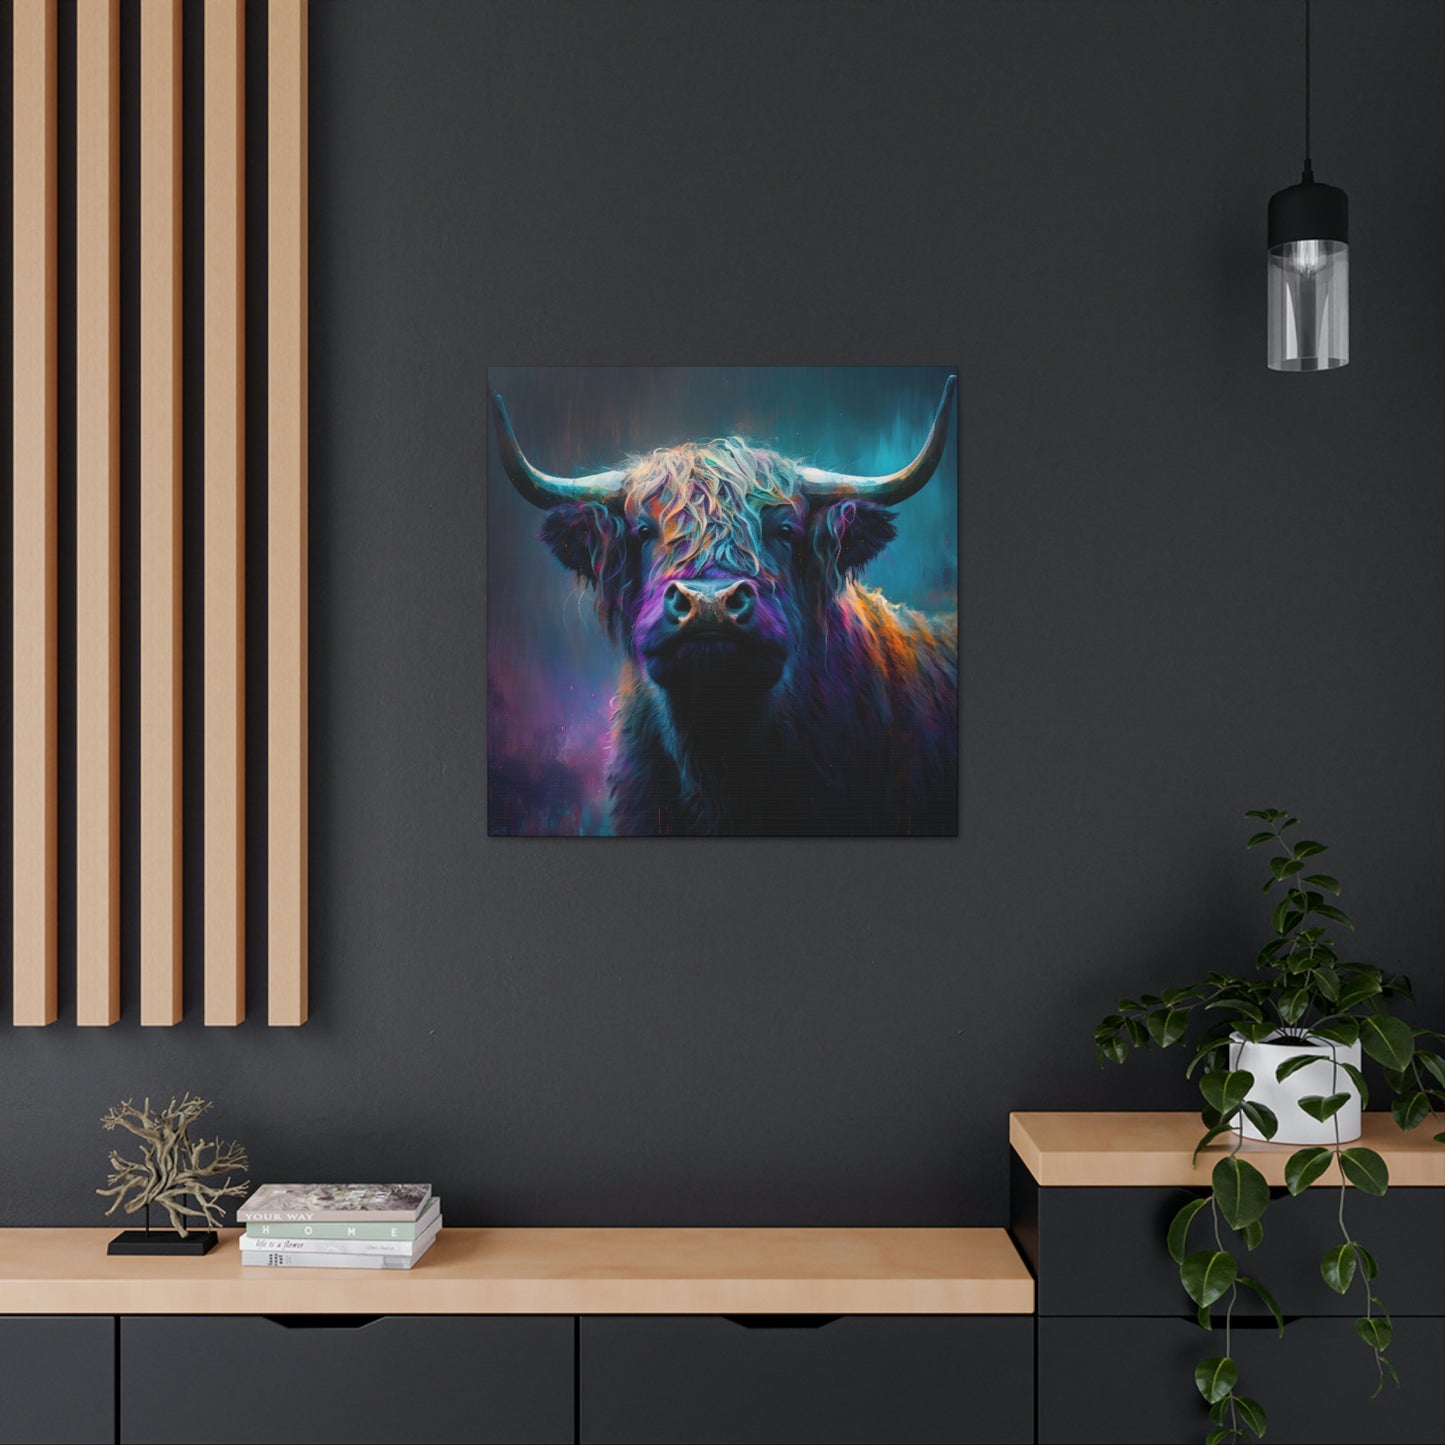 Spectrum of Splendor: The Highland Cow In Abstract